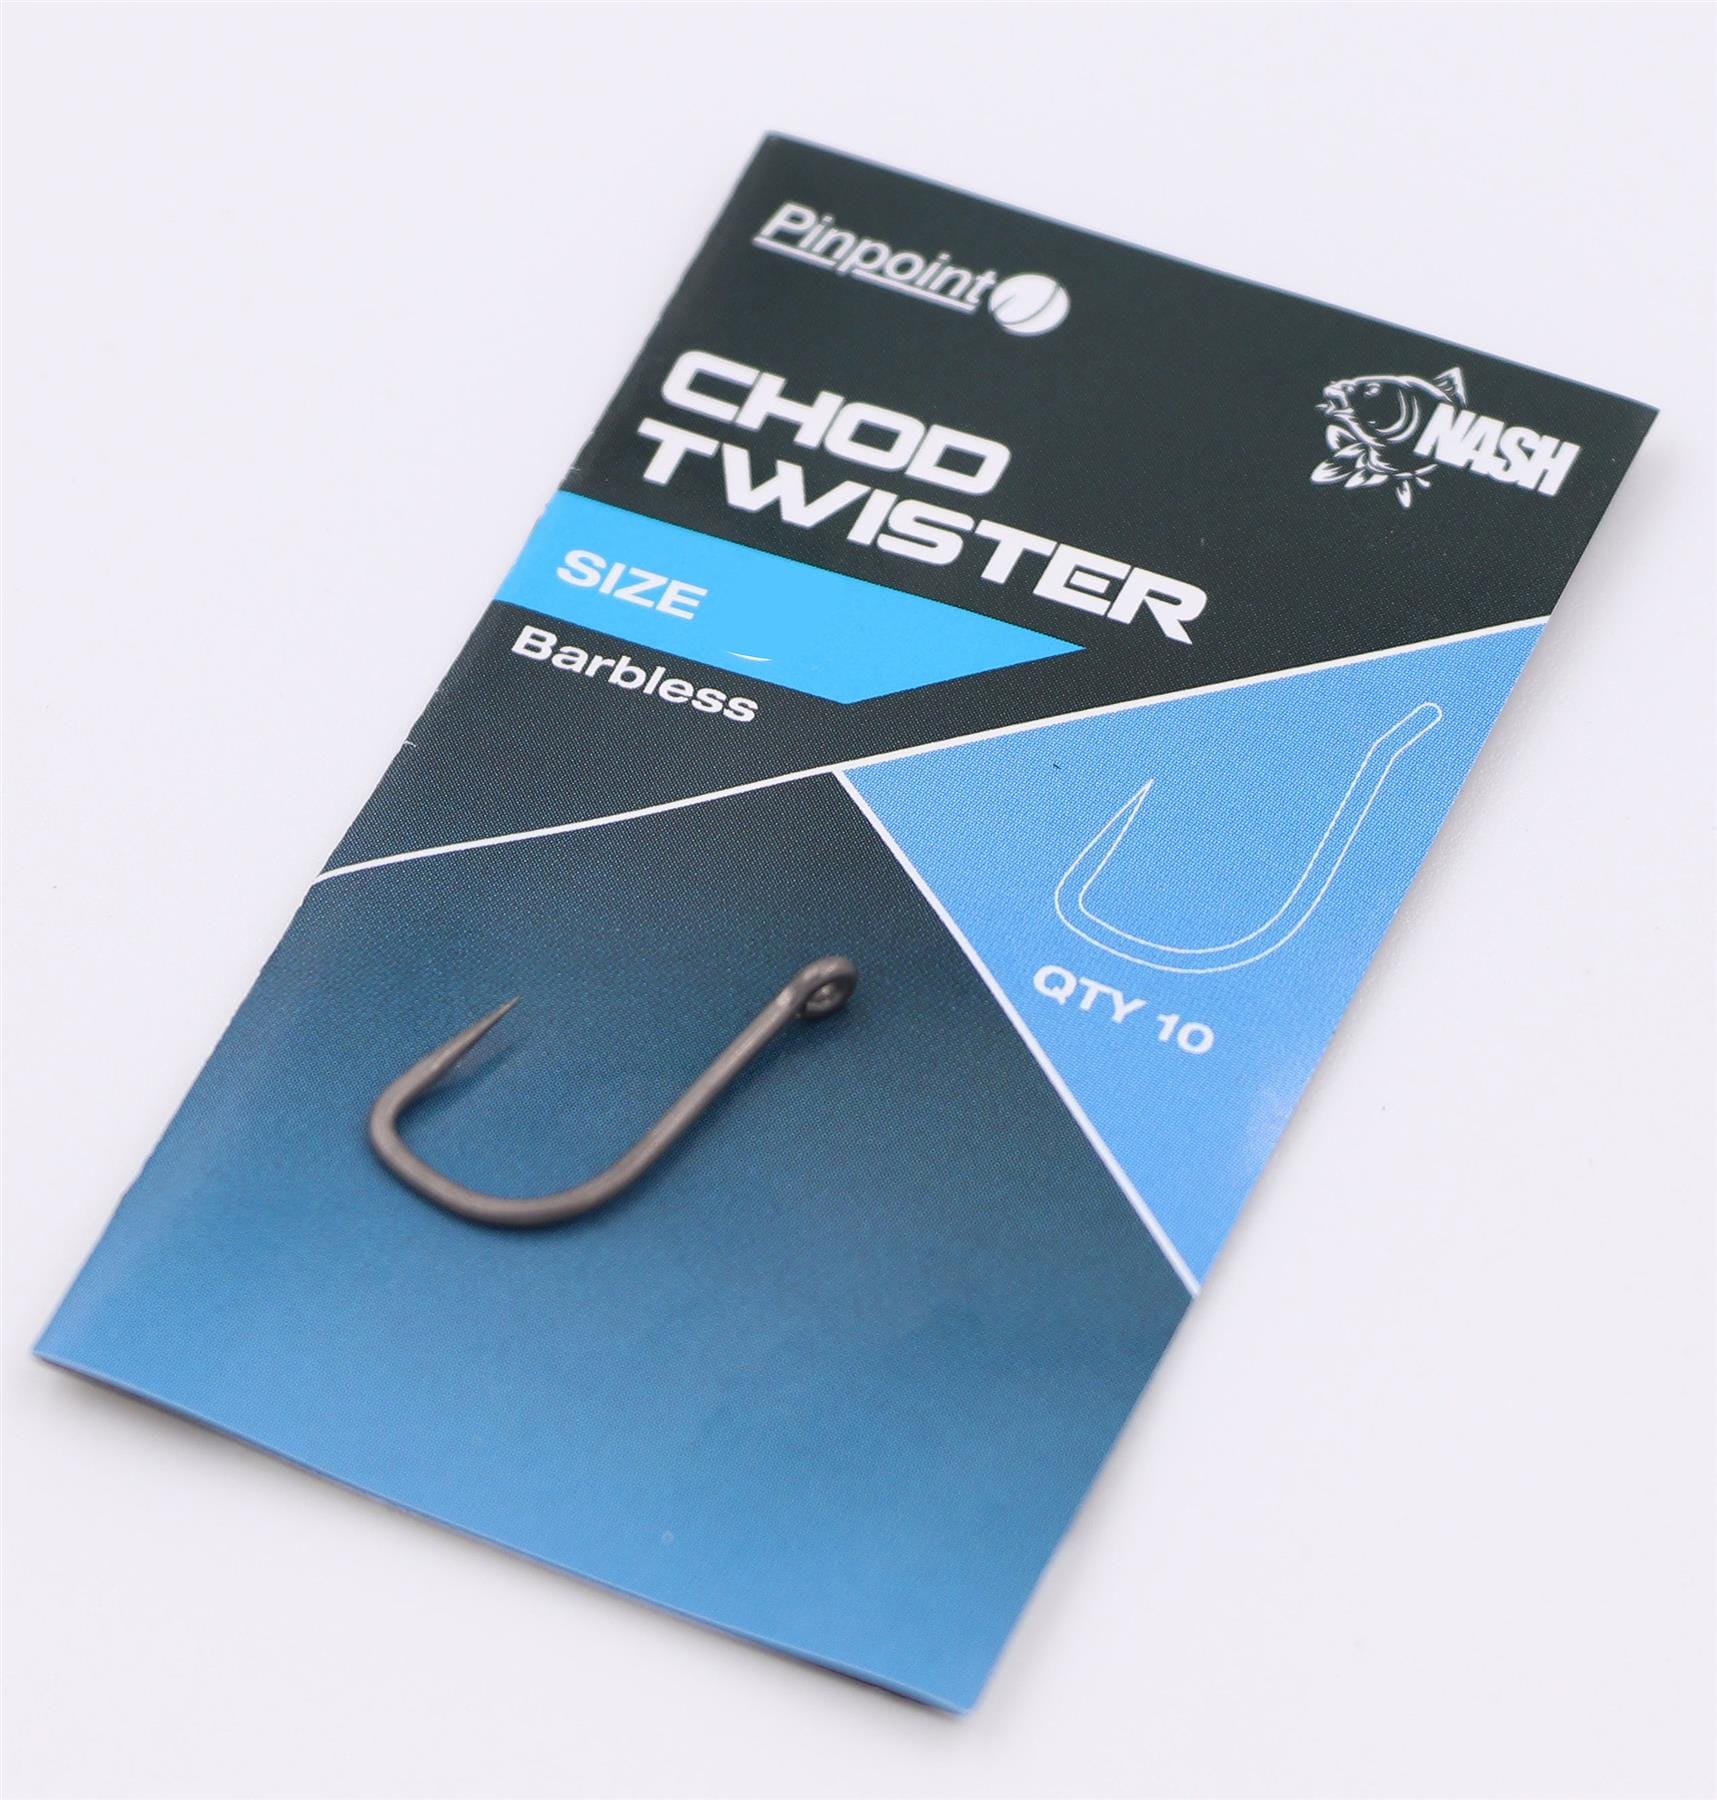 Nash Chod Claw Hooks - Rods and Lines